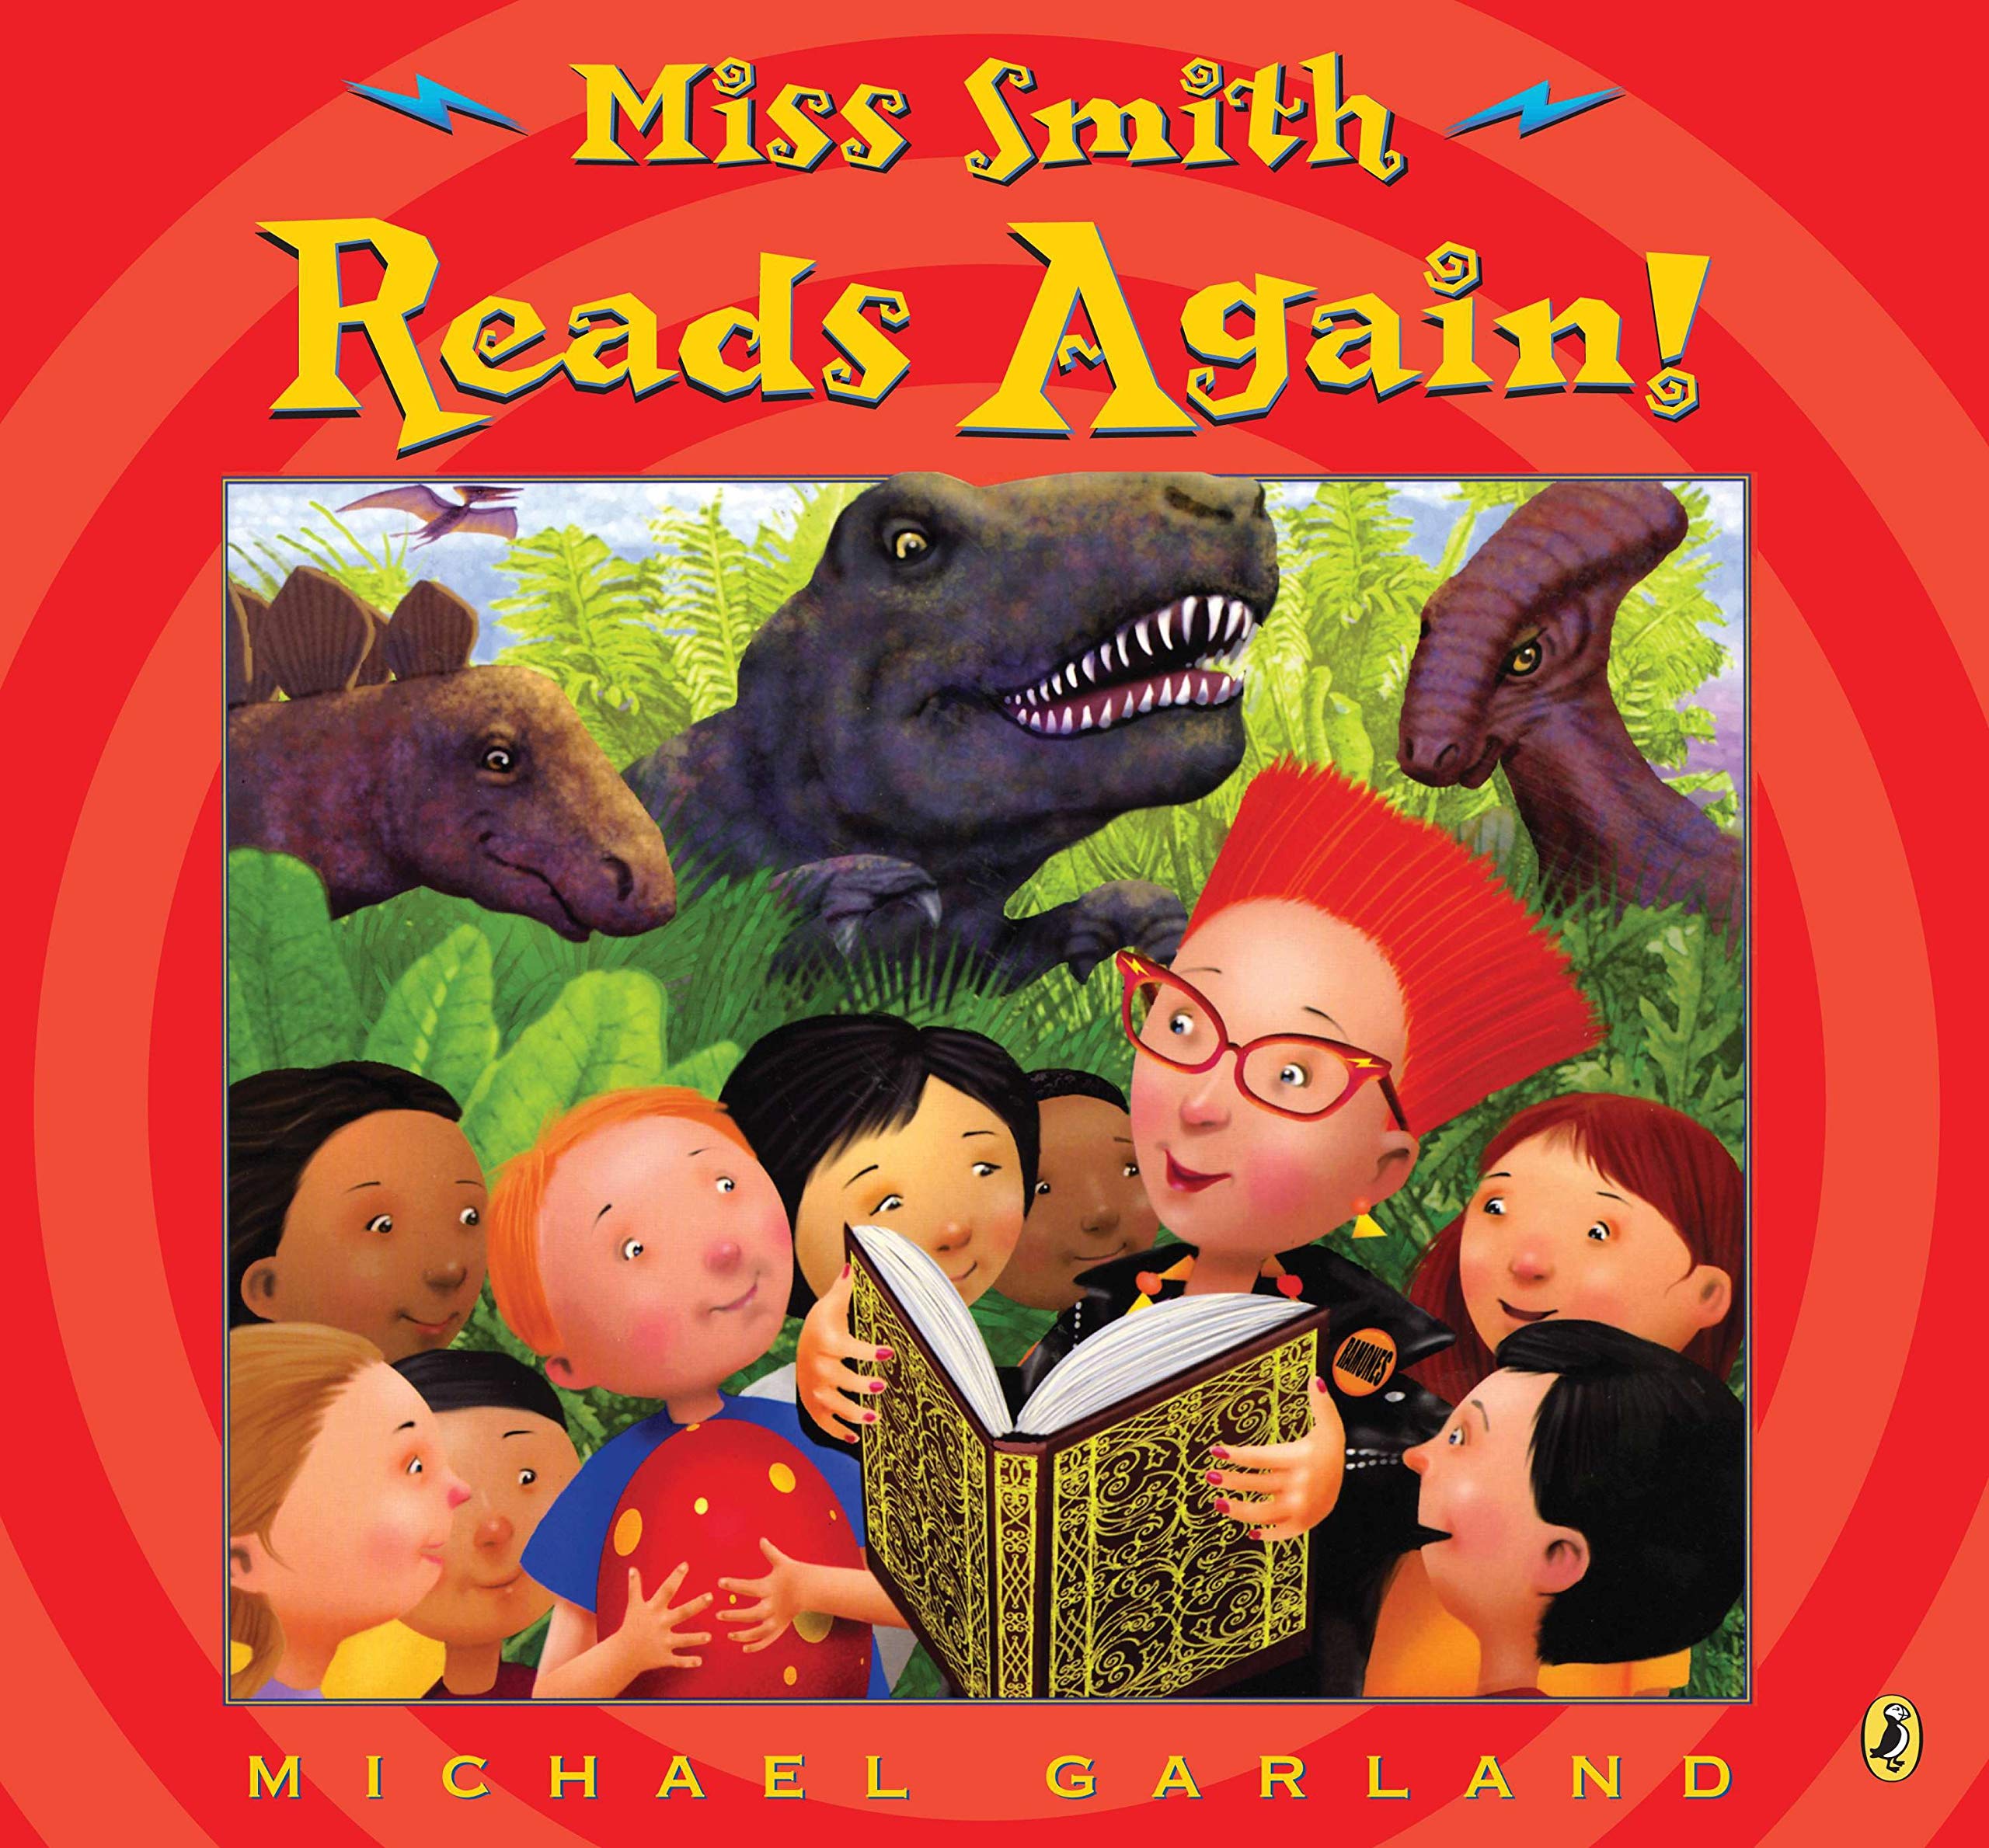 Miss Smith reads again!